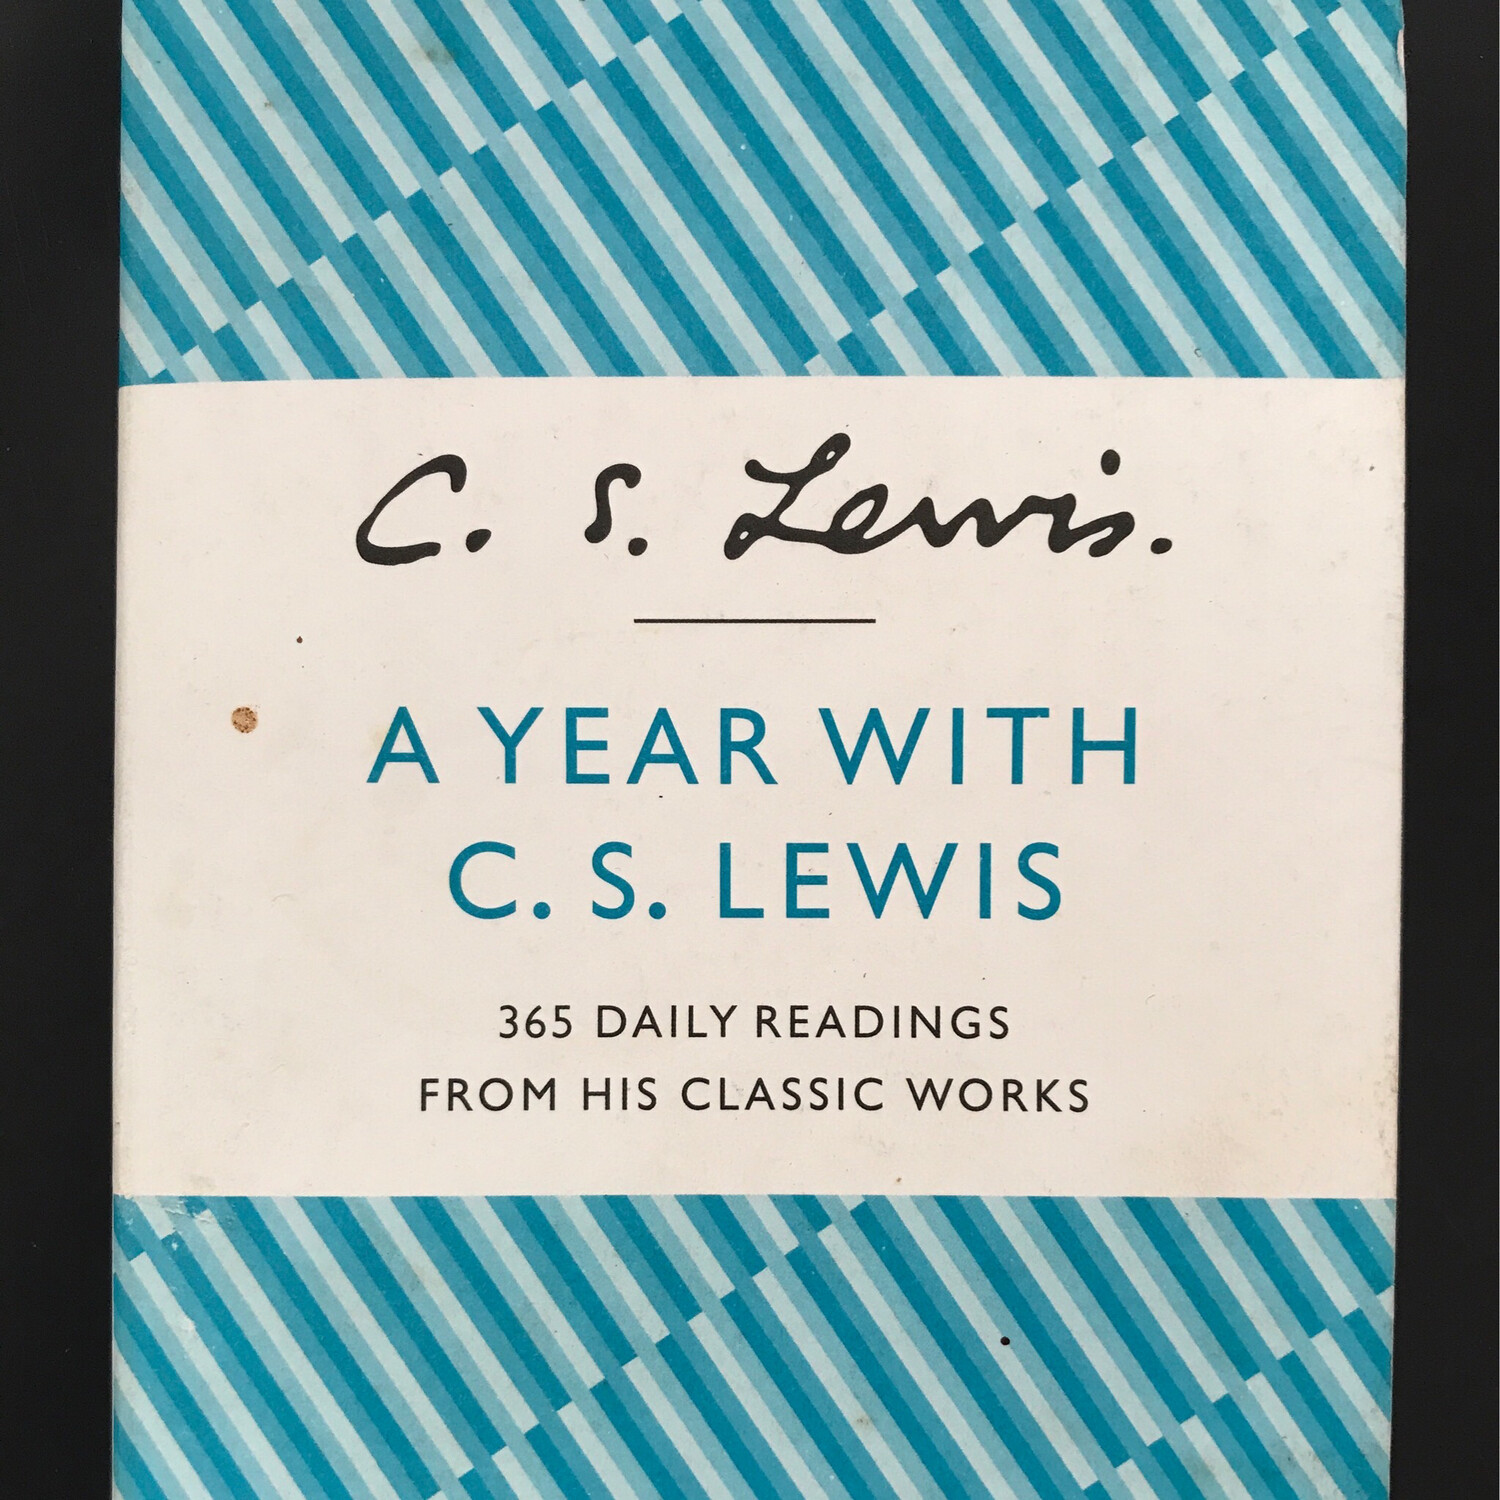 A Year With C. S. Lewis, C. S. Lewis